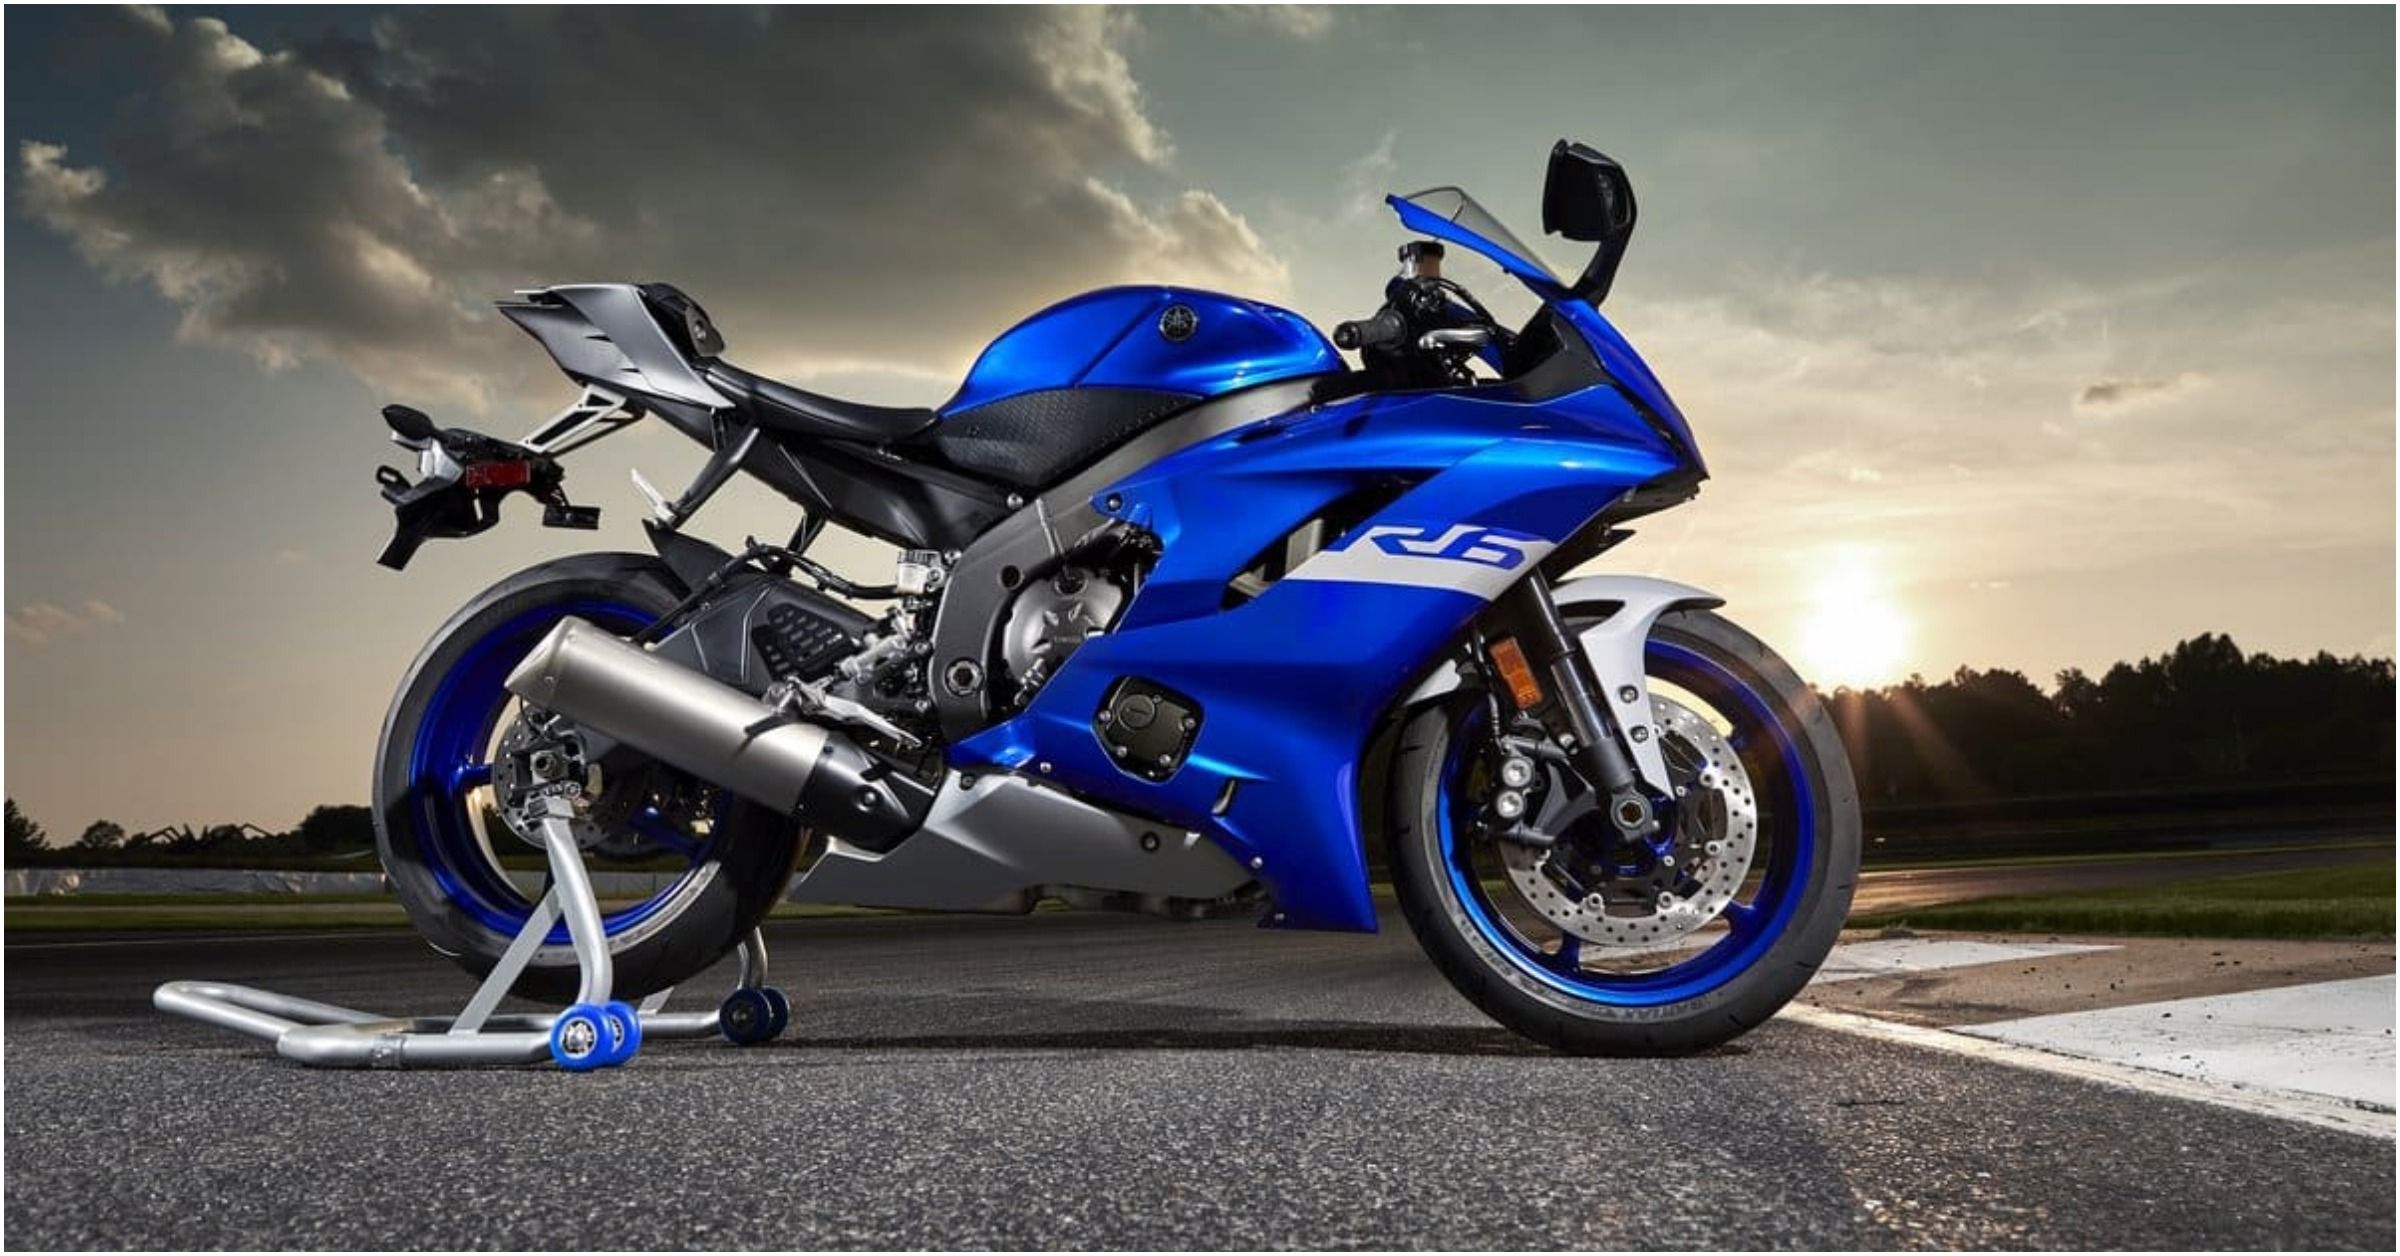 10 Of The Best-Selling Motorcycles In 2019 (10 Of The Worst)